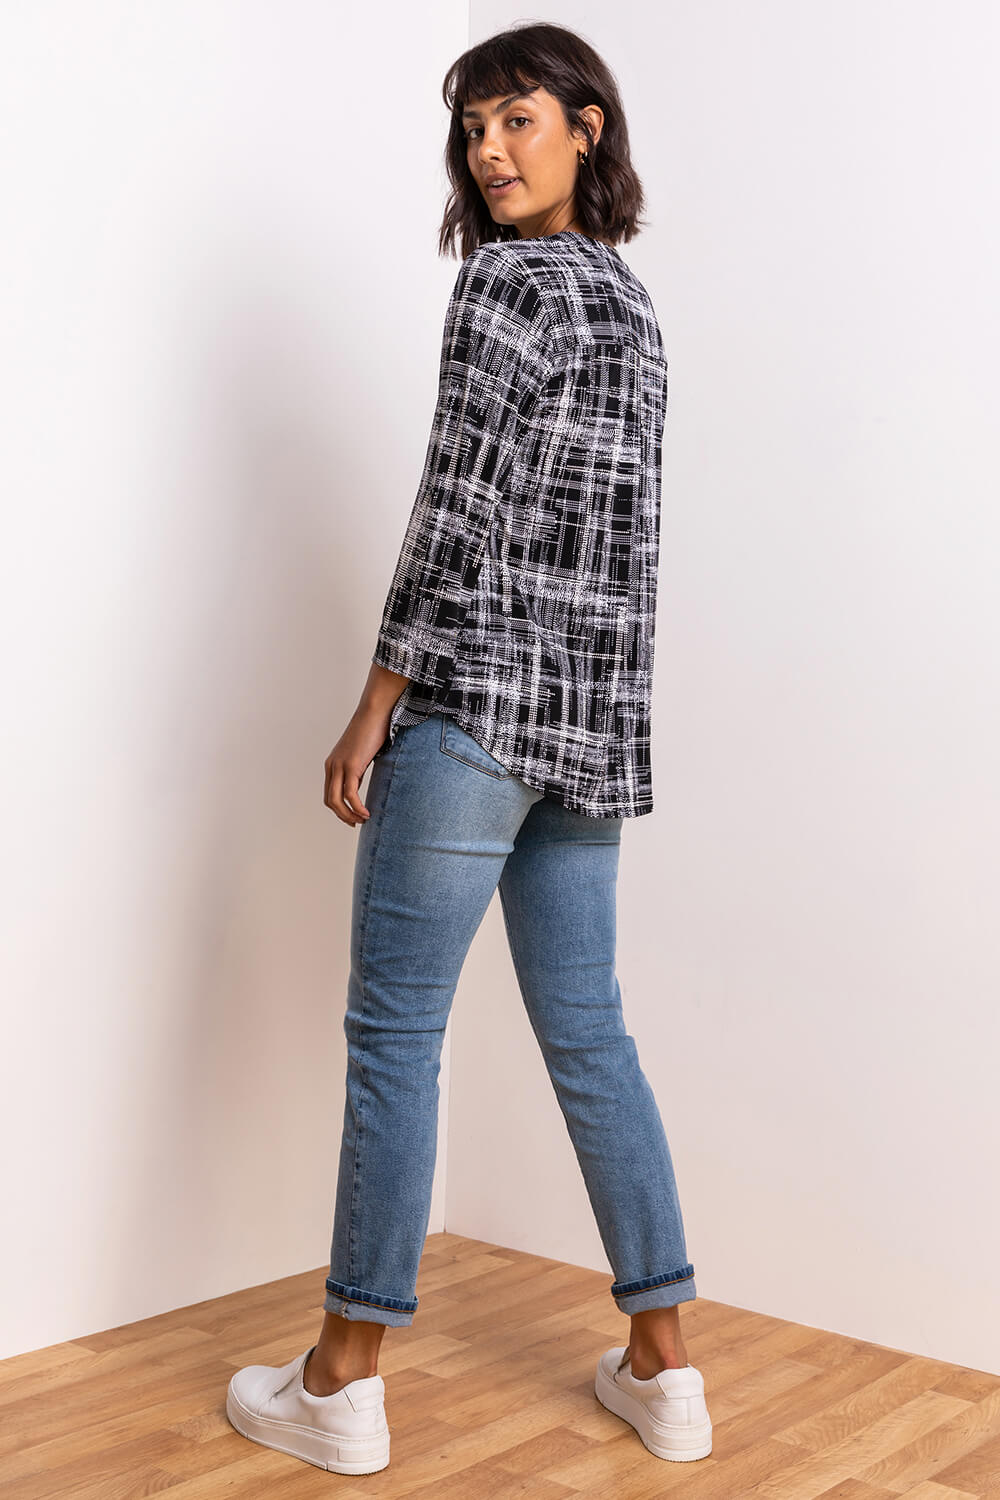 Black Textured Check Print Jersey Top, Image 2 of 4